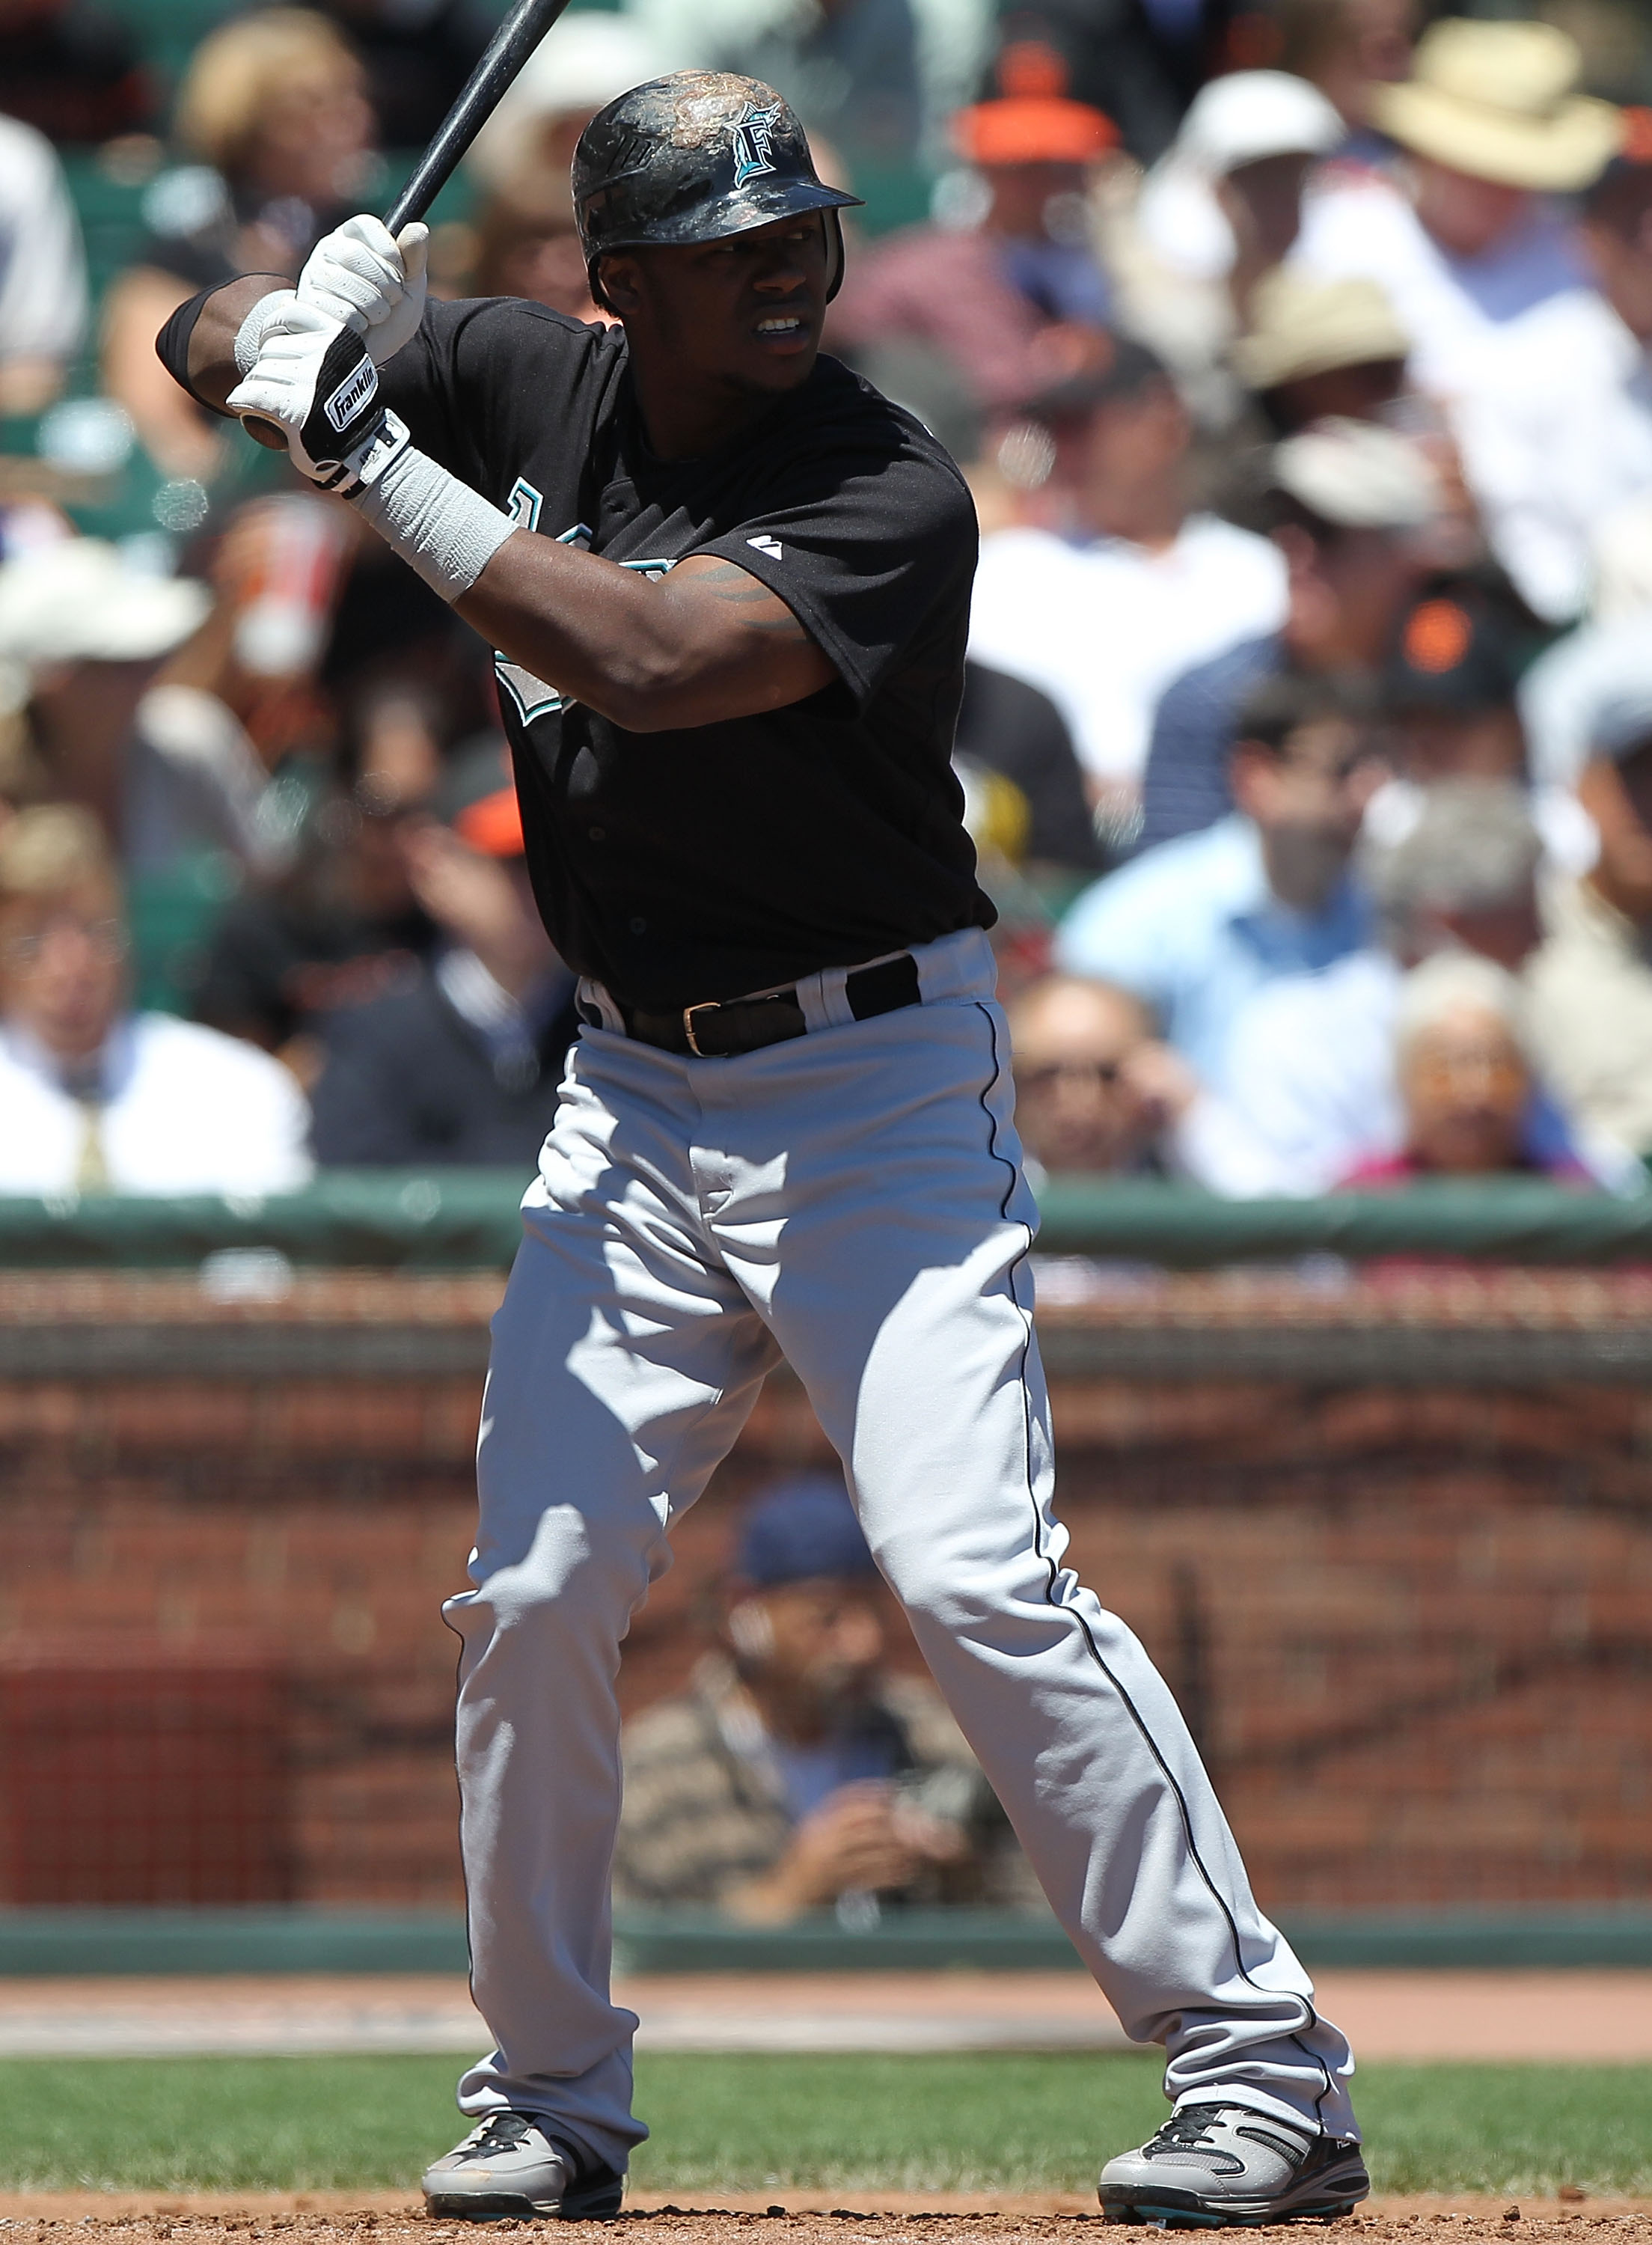 SAN FRANCISCO - JULY 29:  Hanley Ramirez #2 of the Florida Marlins bats against the San Francisco Giants during an MLB game at AT&T Park on July 29, 2010 in San Francisco, California.  (Photo by Jed Jacobsohn/Getty Images)